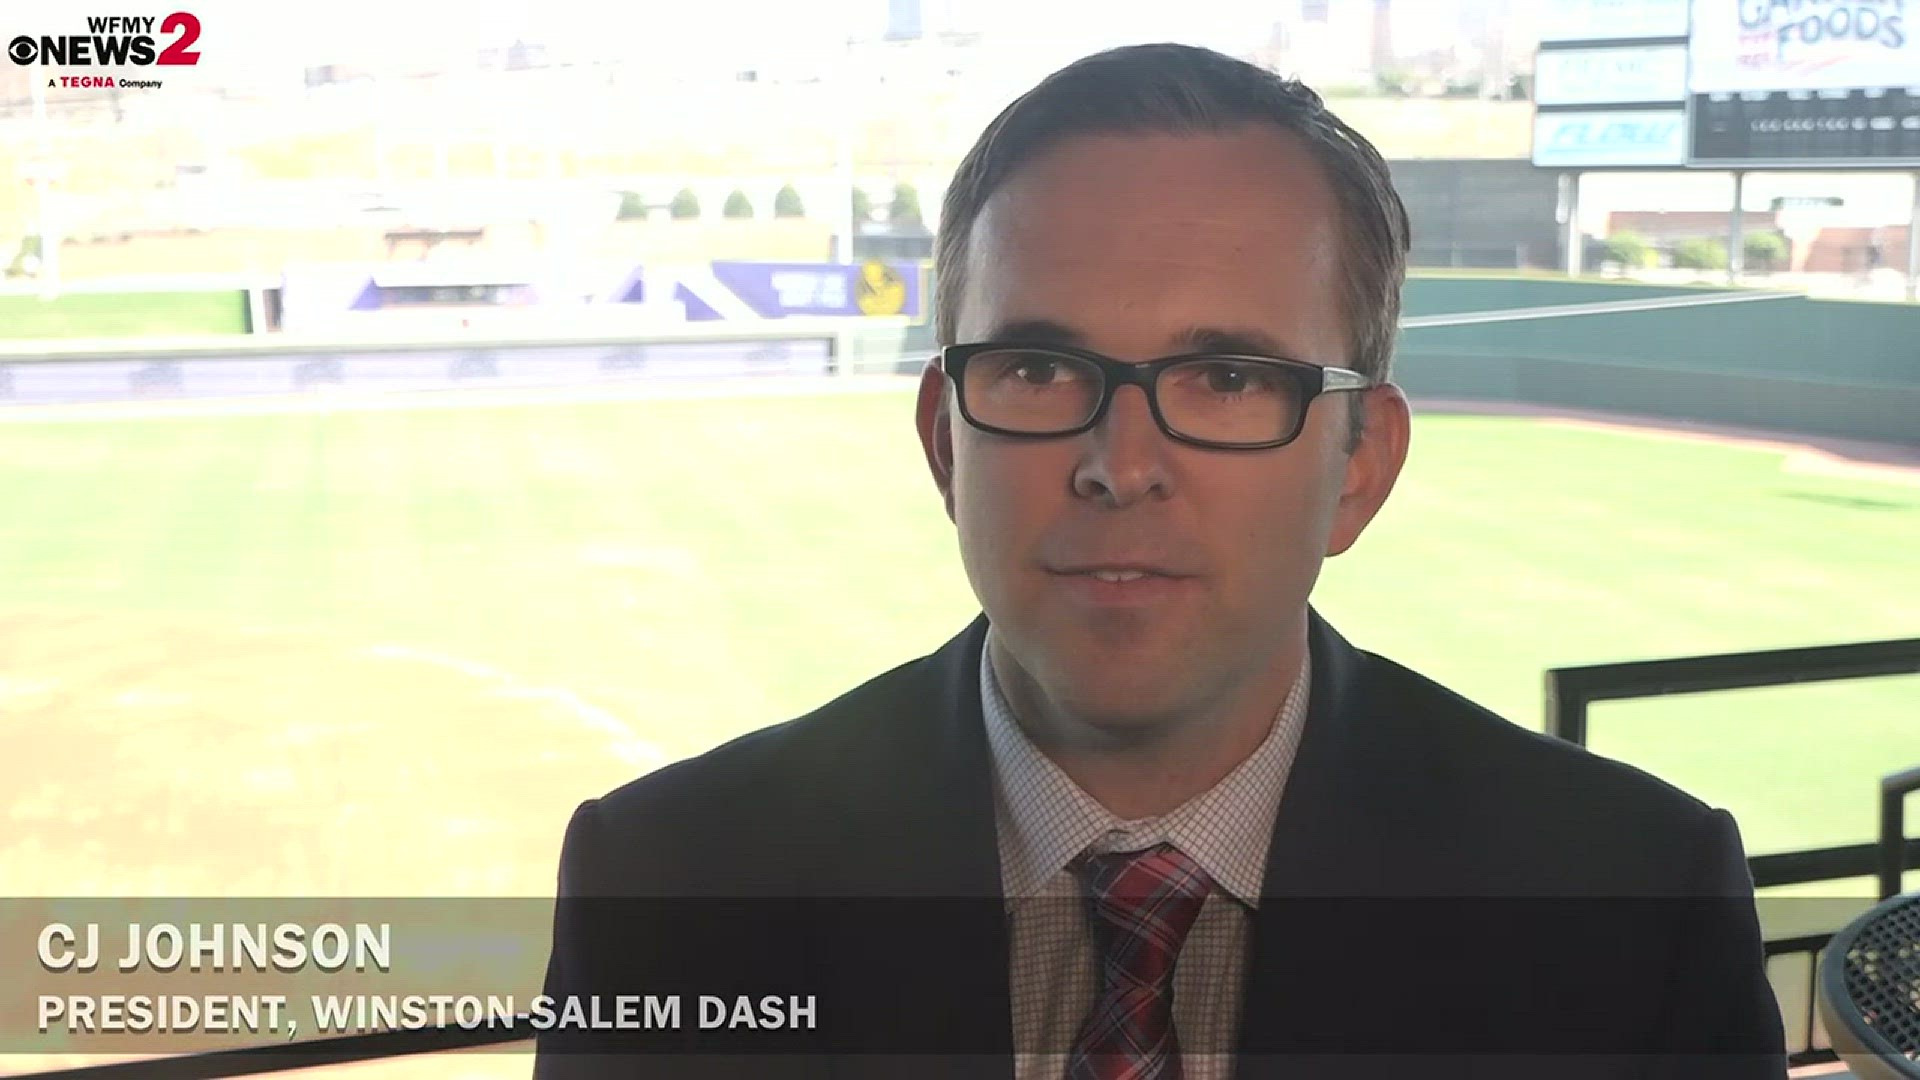 Winston-Salem's summer destination is the Winston-Salem Dash and the team is ready to kick-off their ninth season at BB&T Ballpark in April.